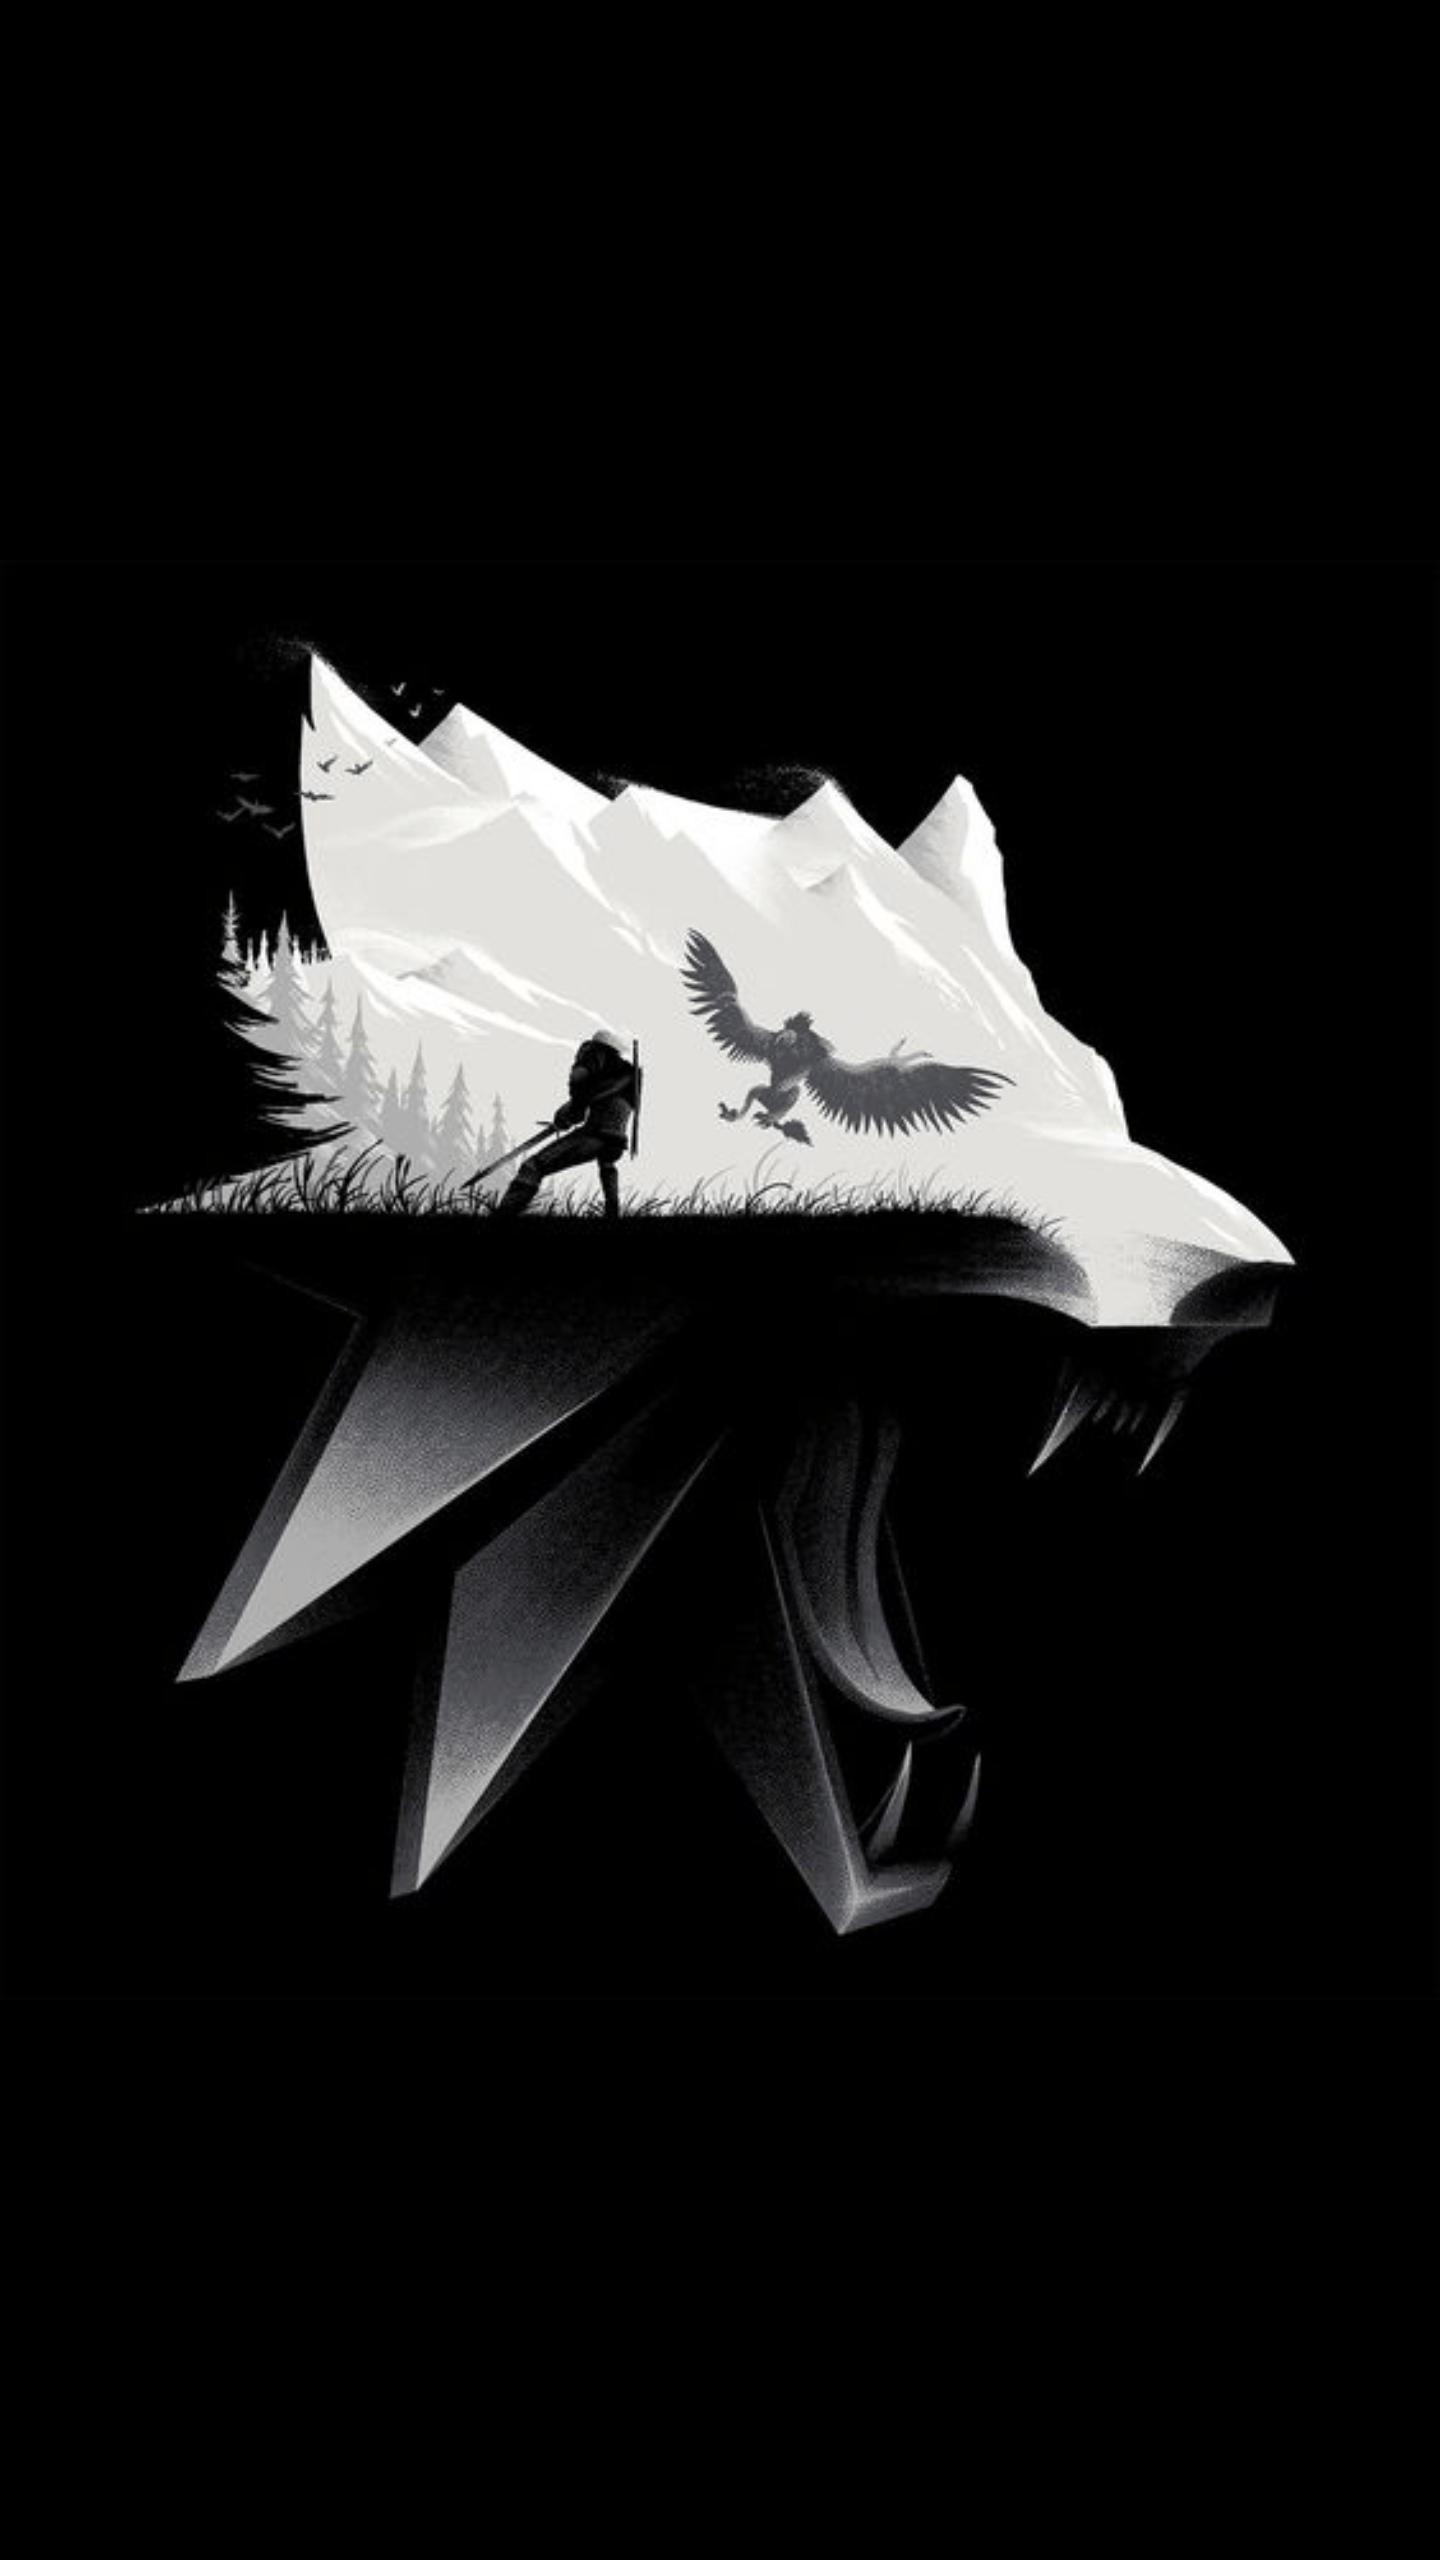 Witcher AMOLED wallpaper [2560x1440]